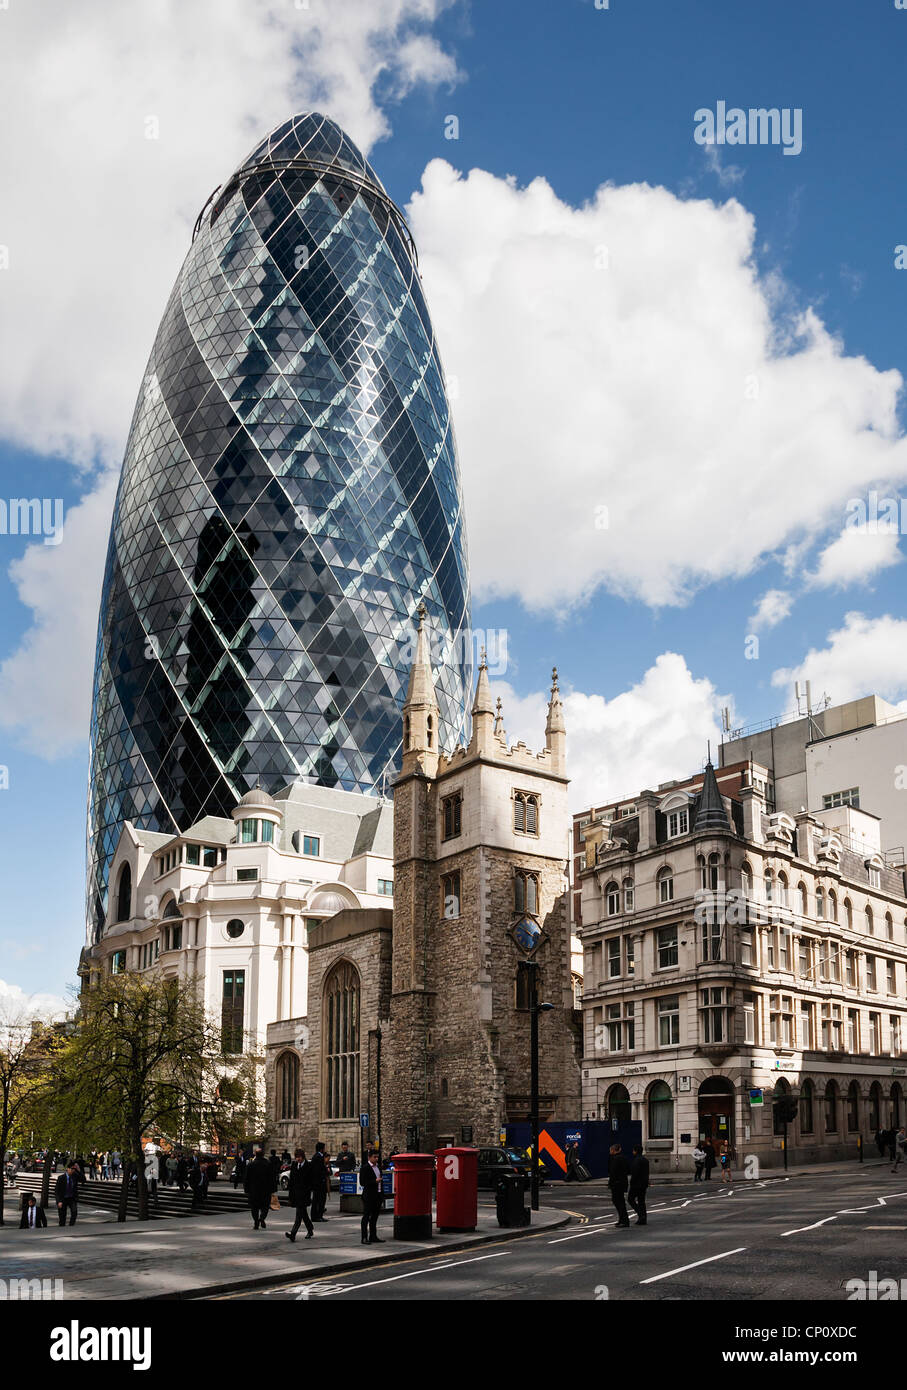 30 St Marys Axe the Swiss Re Tower better known as the Gherkin, London, England. Stock Photo